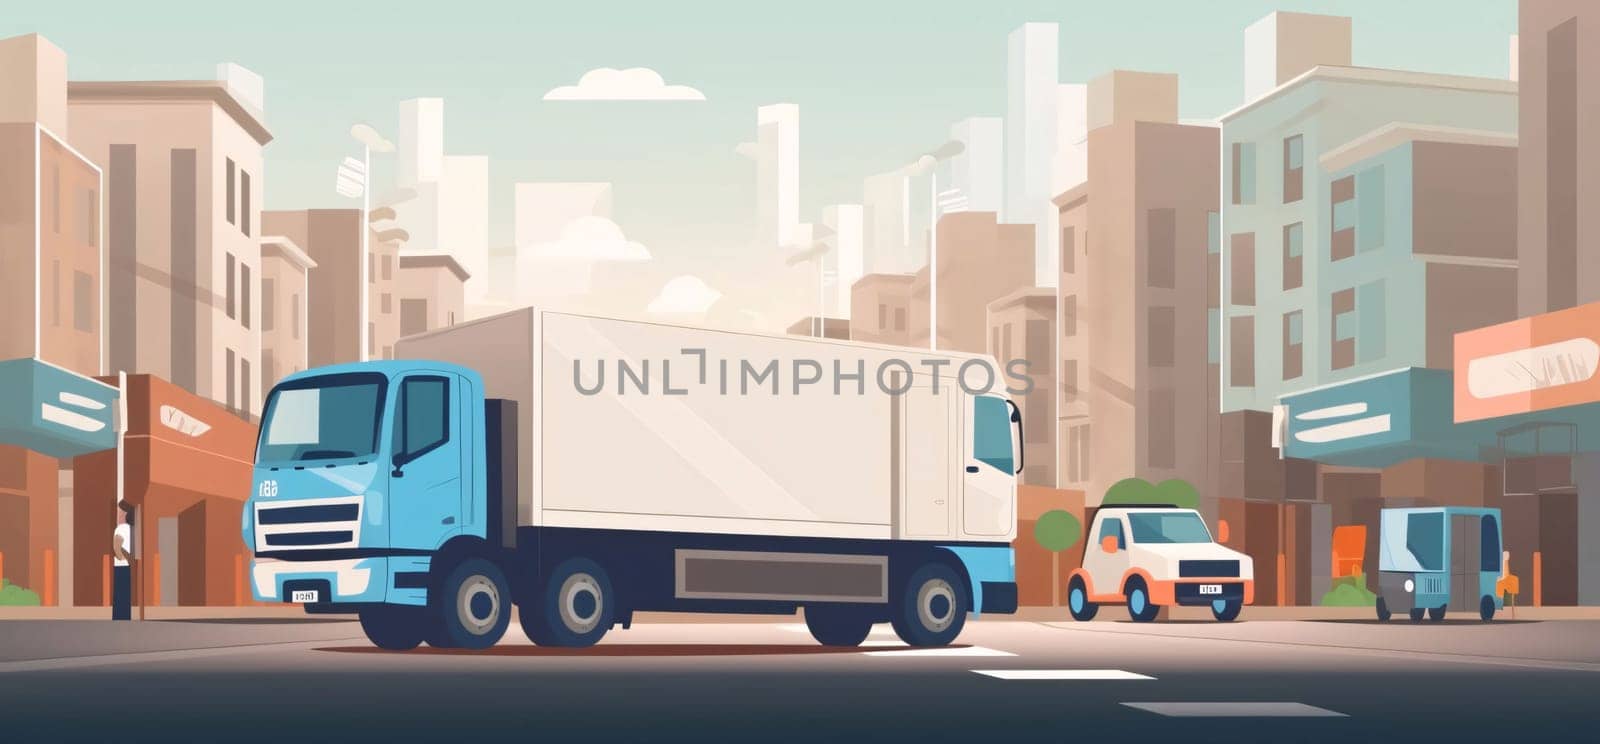 Truck on the road. Vector illustration in flat style. Side view. by ThemesS